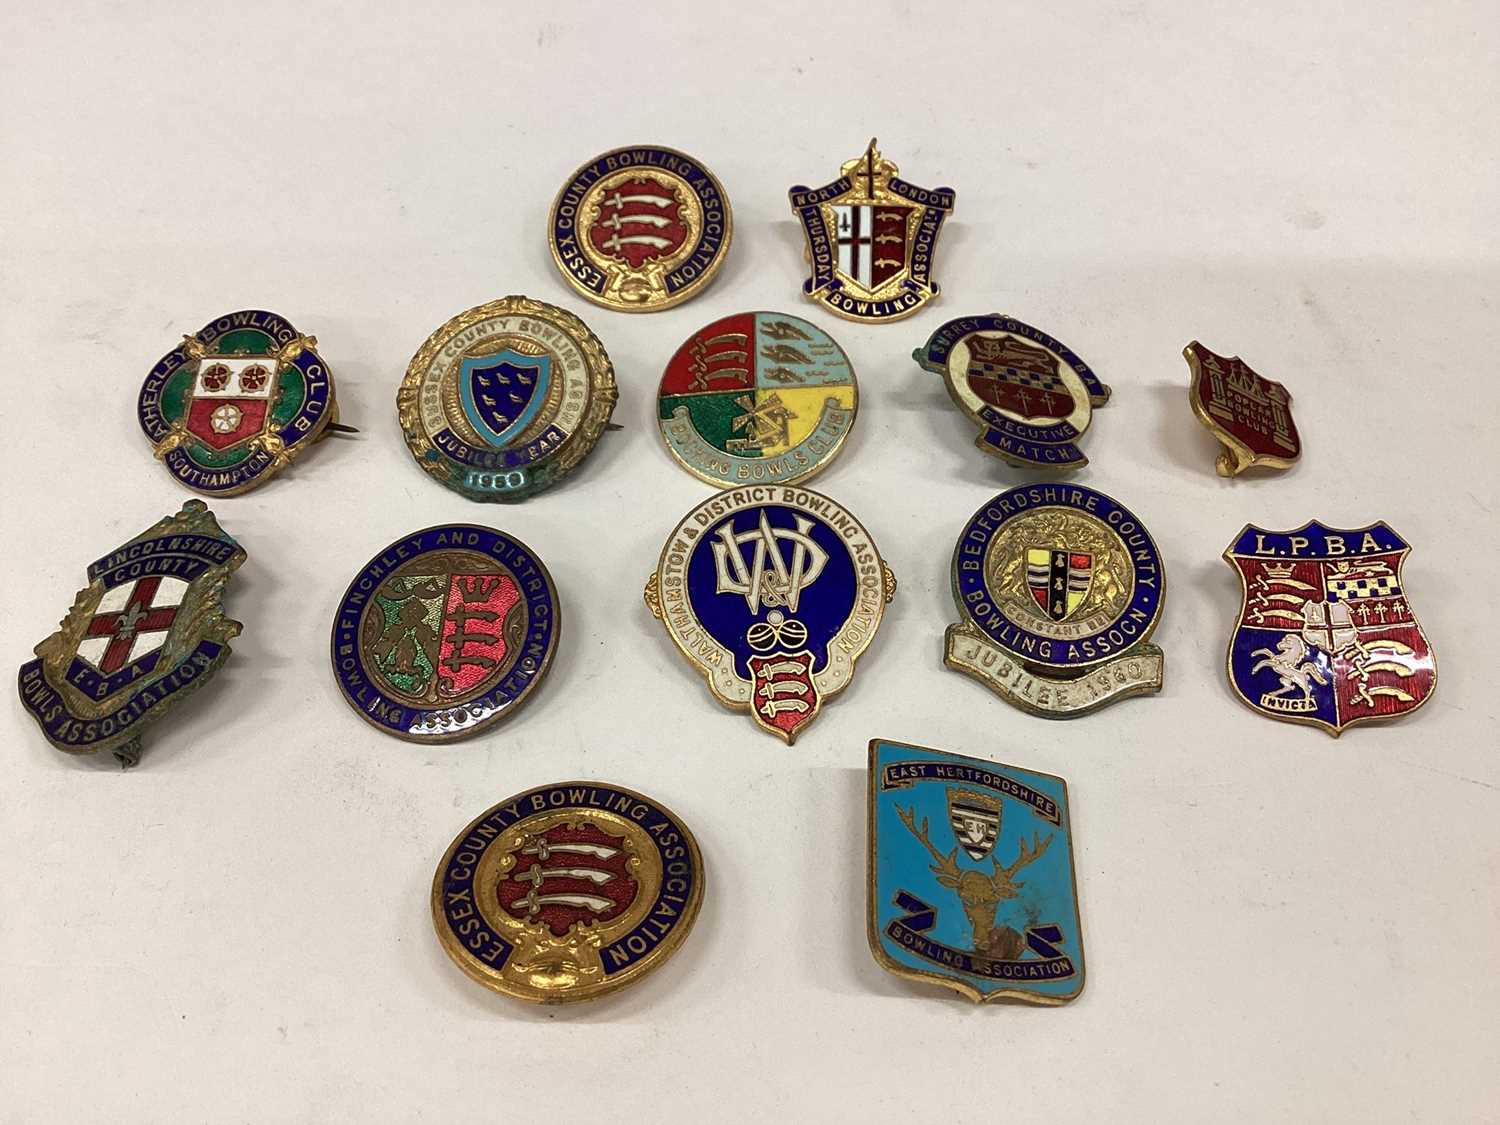 Lot 2670 - Quantity of football and bowls enamel badges, mostly of local interest, and a group of enamel badges possibly related to Trade Unions